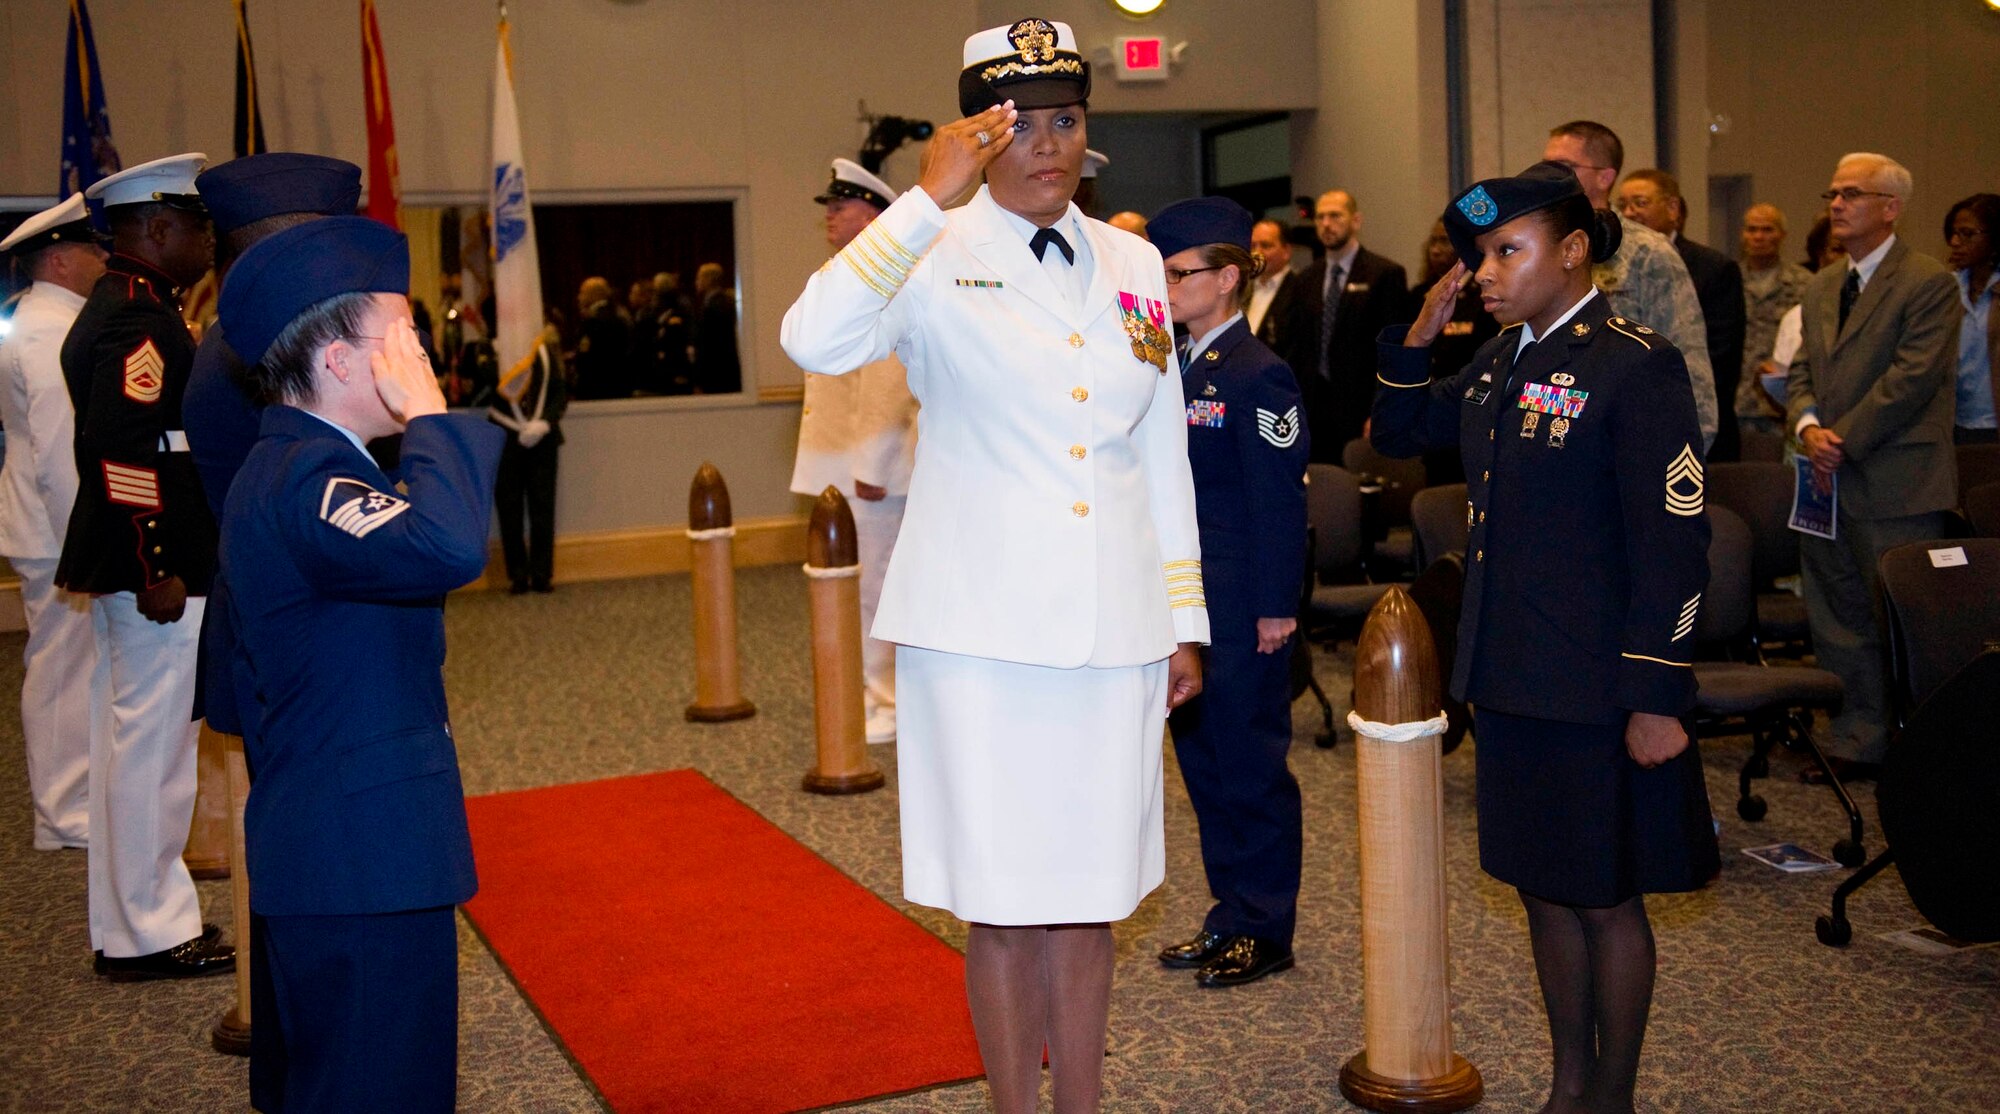 Navy Capt. Yolanda Y. Reagans became the 14th Commandant of DEOMI and the
fi rst female African American to lead the Institute during a Change of Leadership
and Assumption of Command ceremony here. About 300 people were present at
the ceremony that was highlighted by military customs and traditions dating to
colonial times. (Photo by Matthew Jurgens)